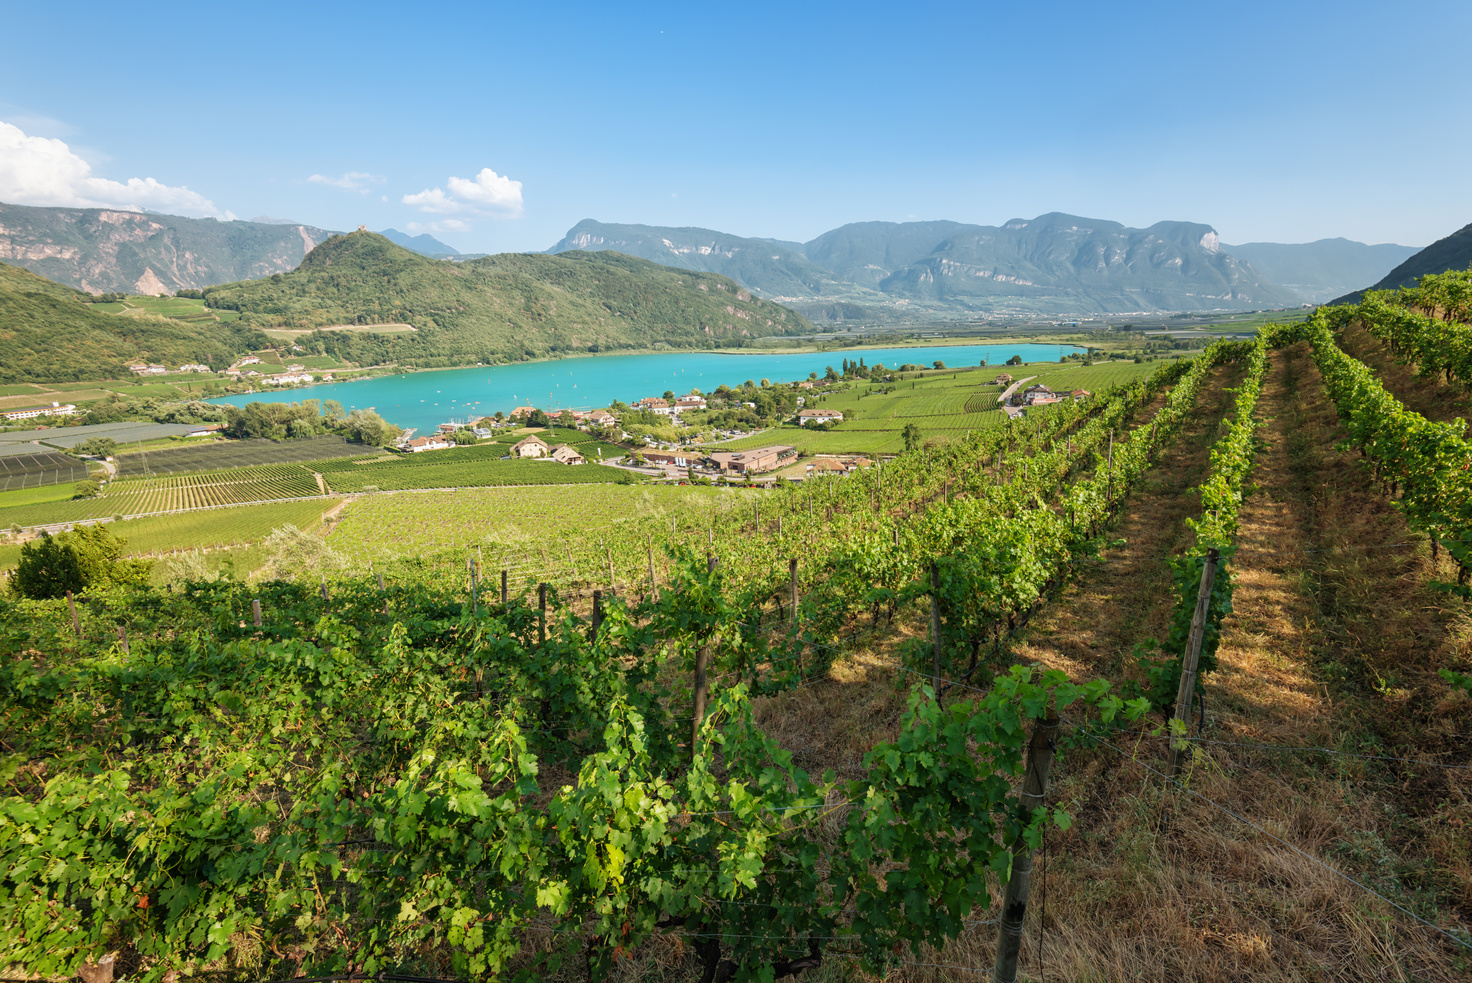 Kaltern lake between mountains and vineyard in South Tyrol, Italy